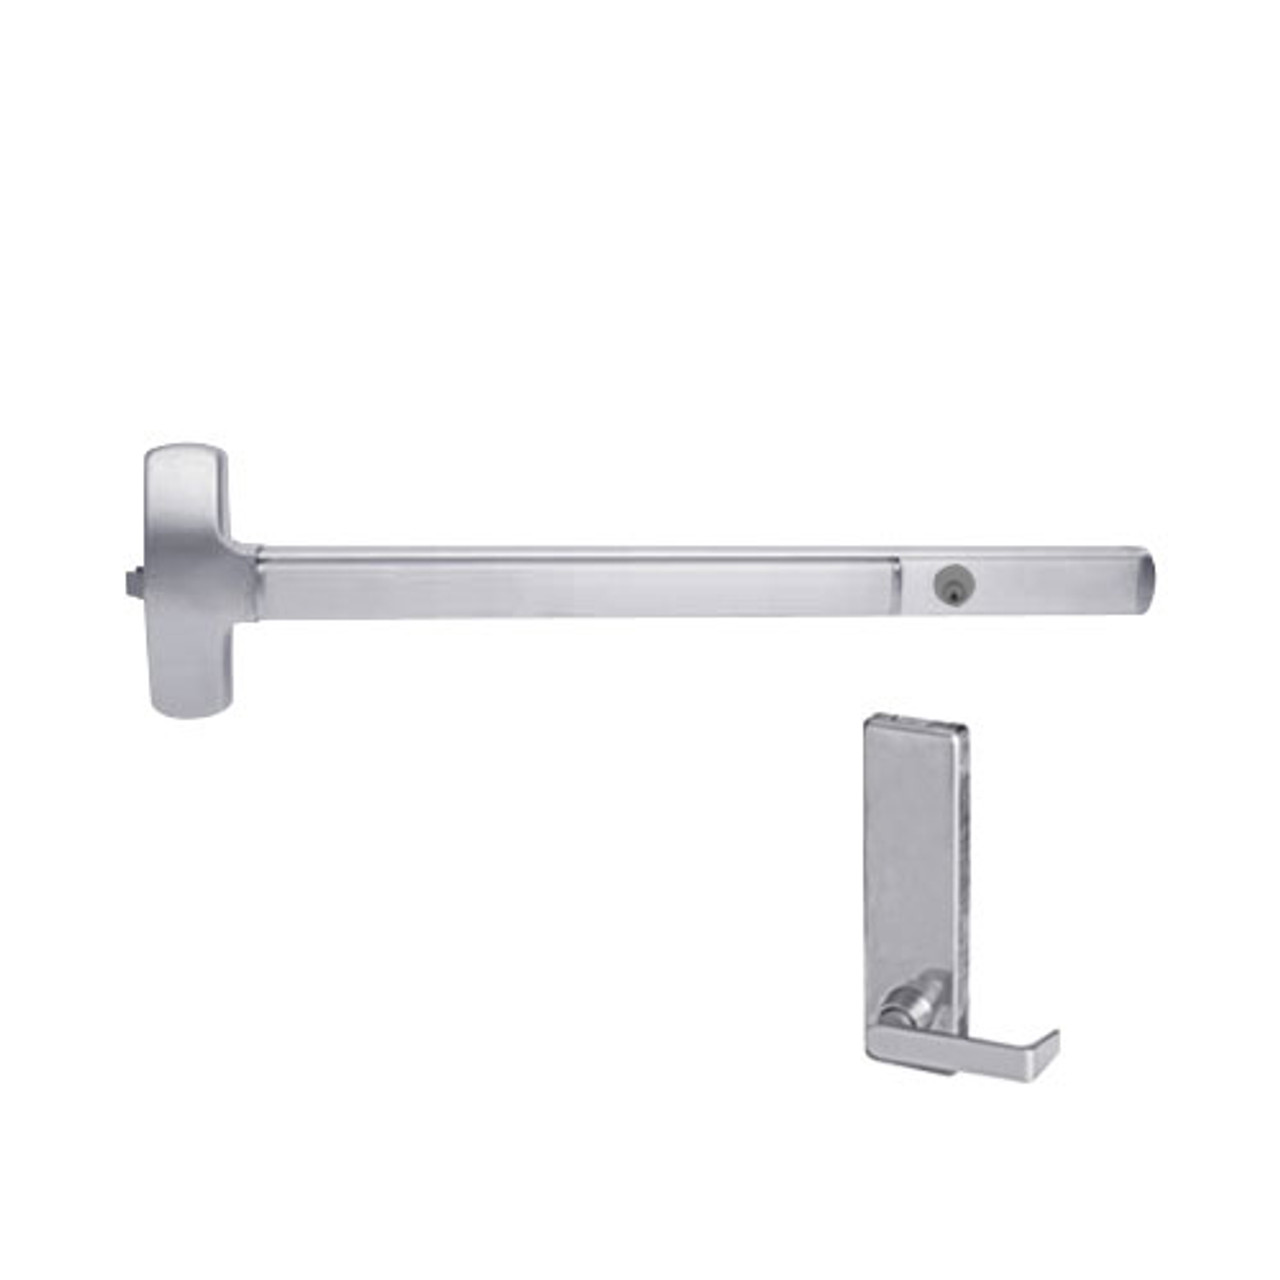 CD25-R-L-BE-DANE-US32-3-RHR Falcon Exit Device in Polished Stainless Steel